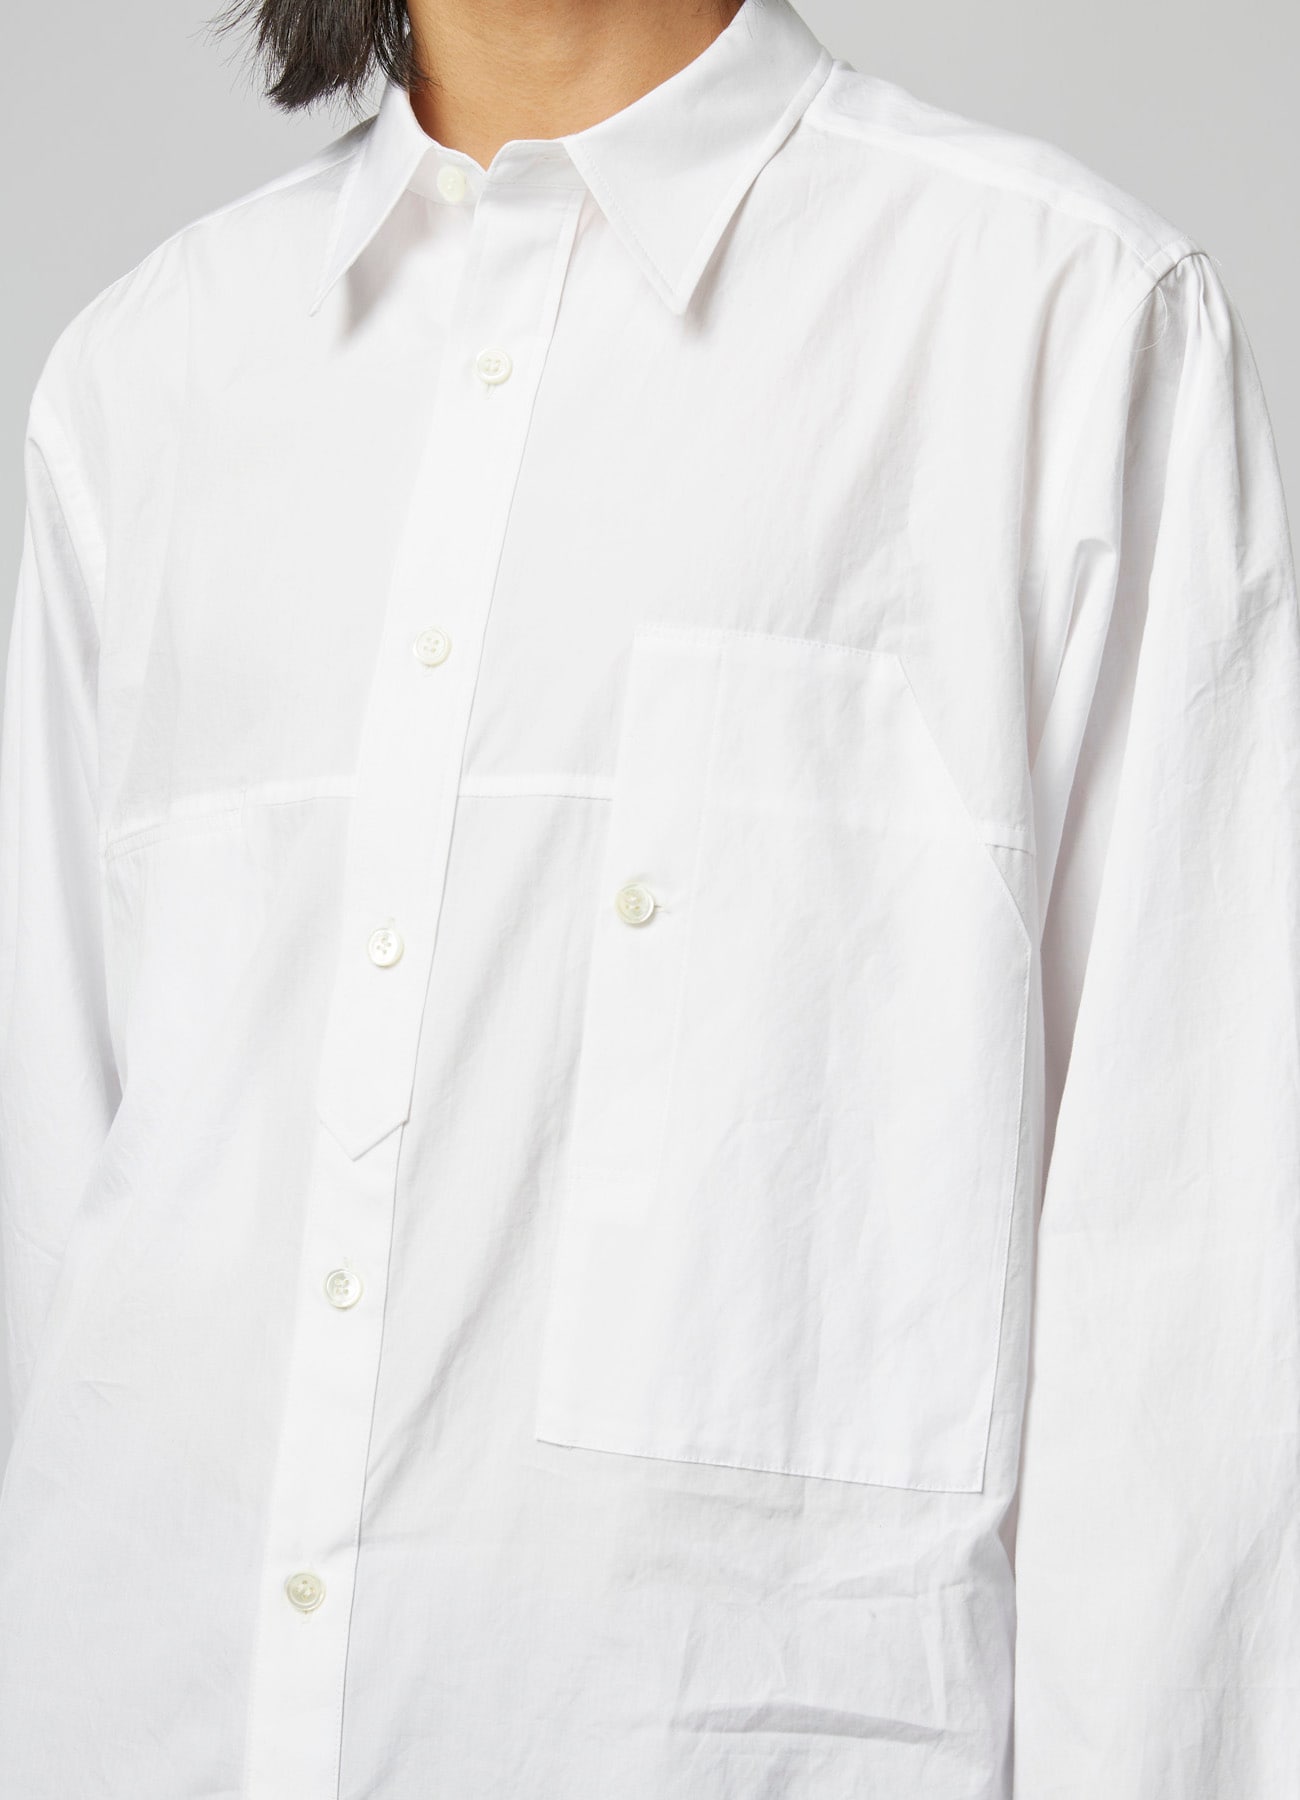 COTTON BROADCLOTH SHIRT WITH CHEST POCKET AND ROUNDED HEM(S WHITE): Y's ...